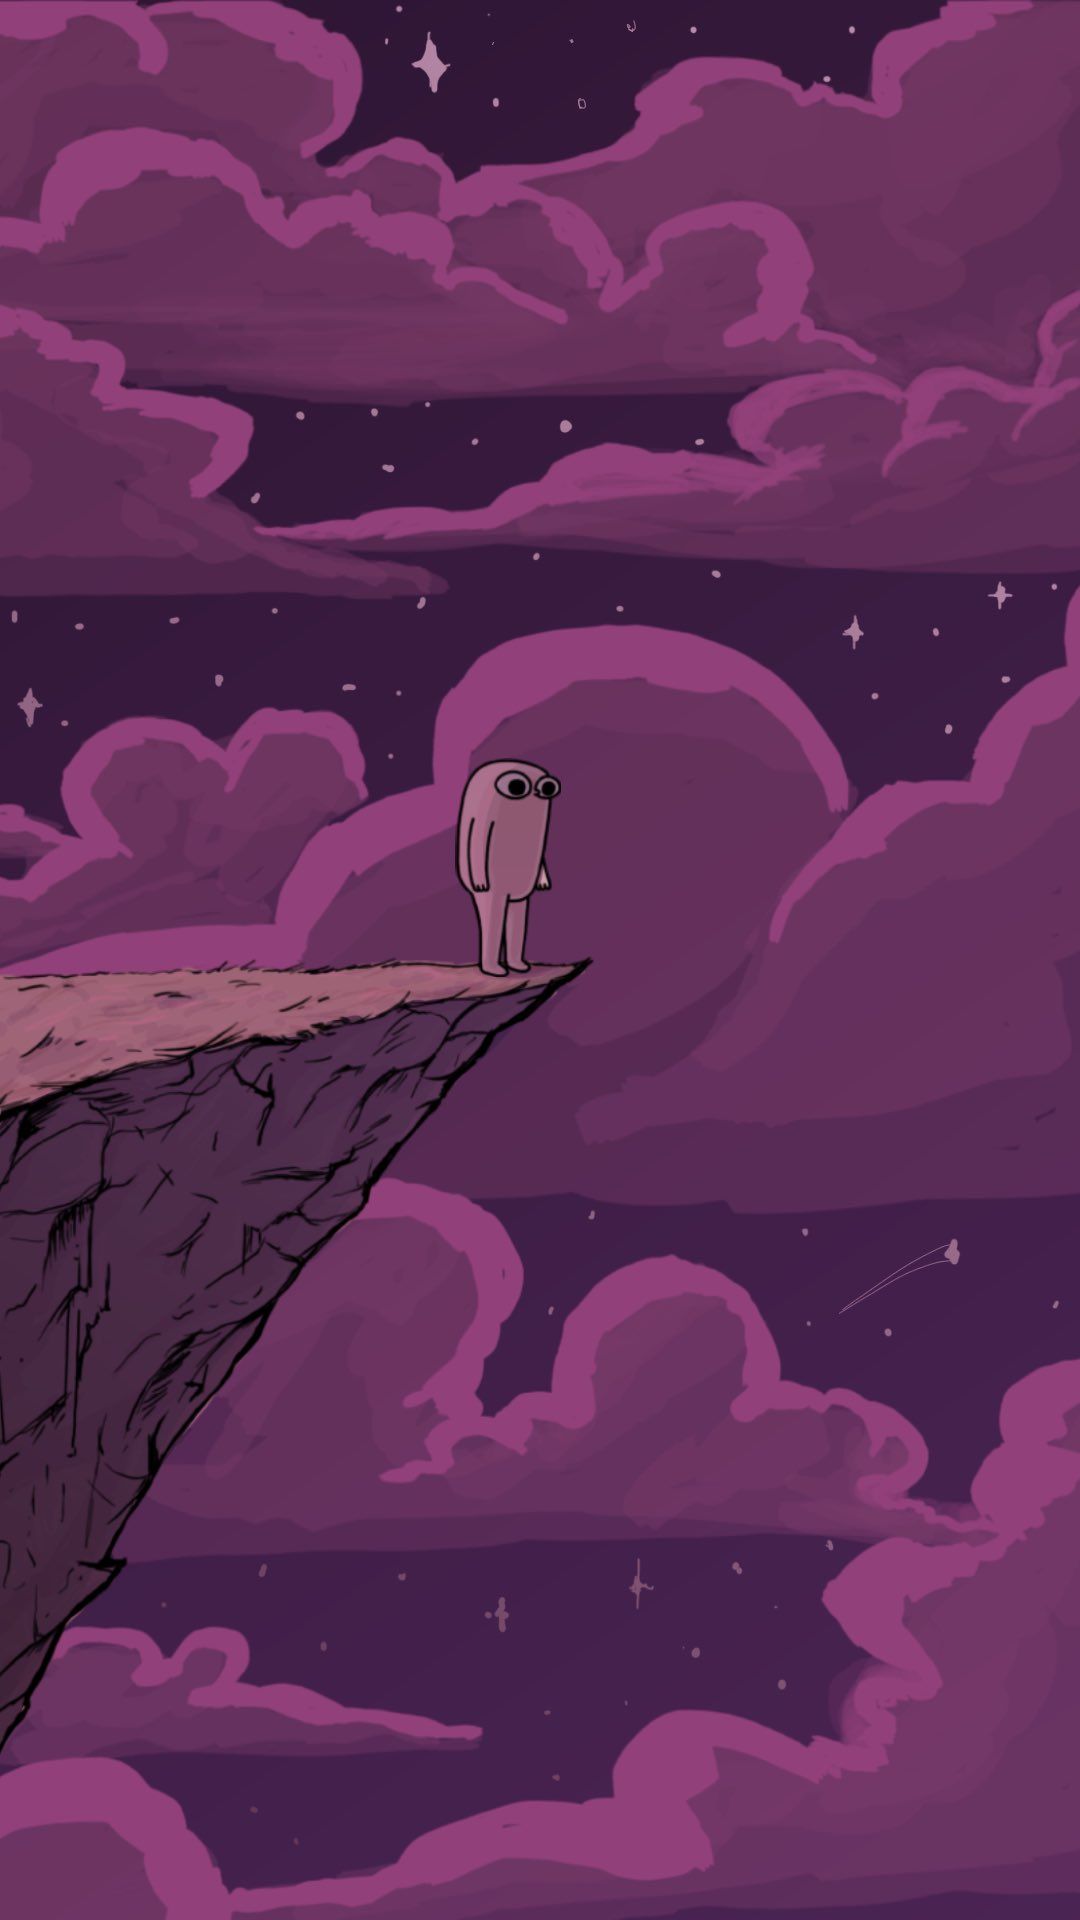 IPhone wallpaper with a purple background - Adventure Time